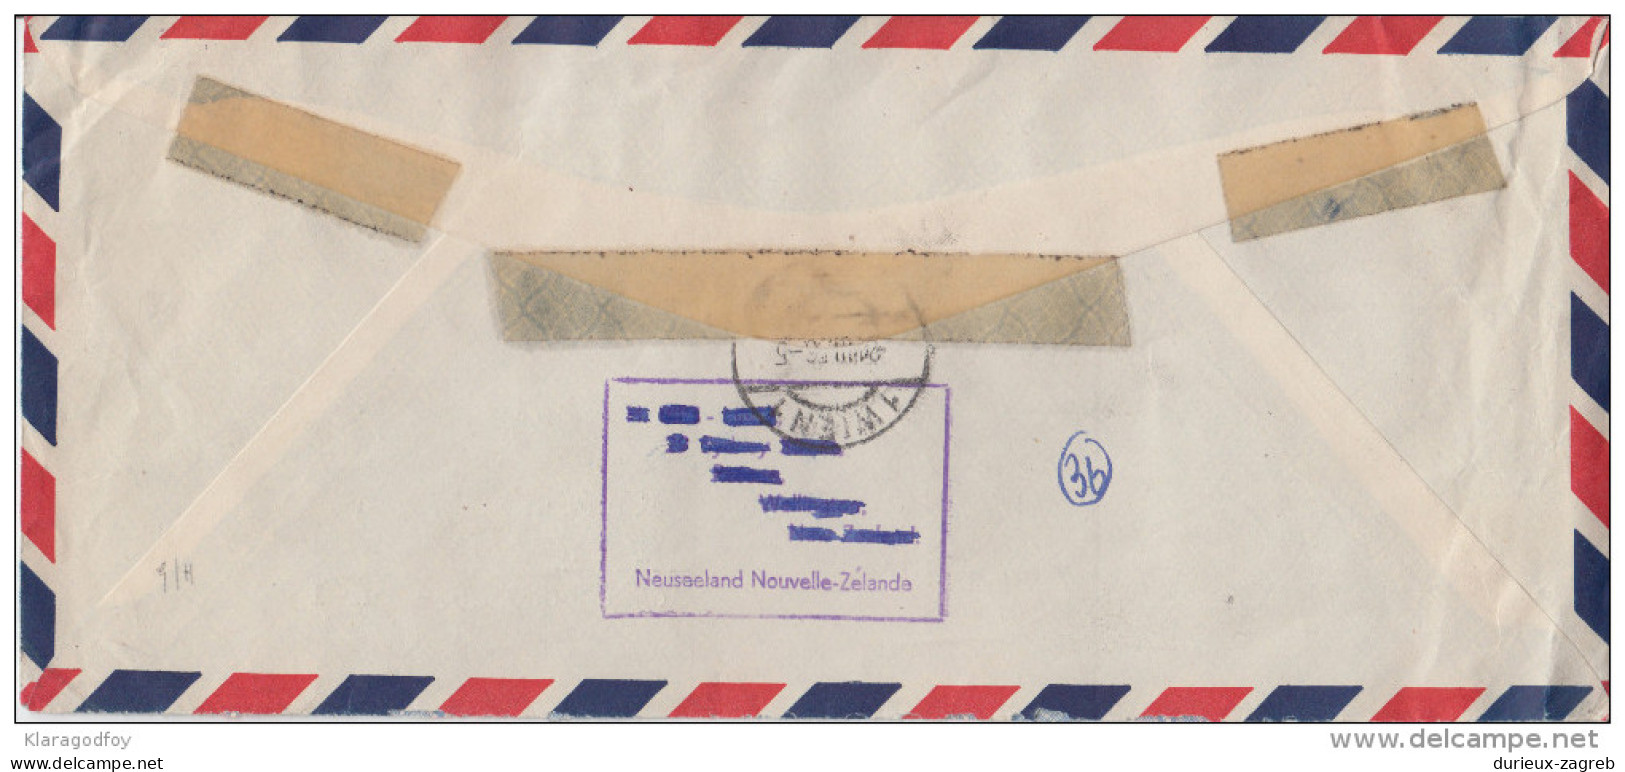 New Zealand Nice Air Mail Letter Cover Travelled To Austria 1956 B160711 - Brieven En Documenten